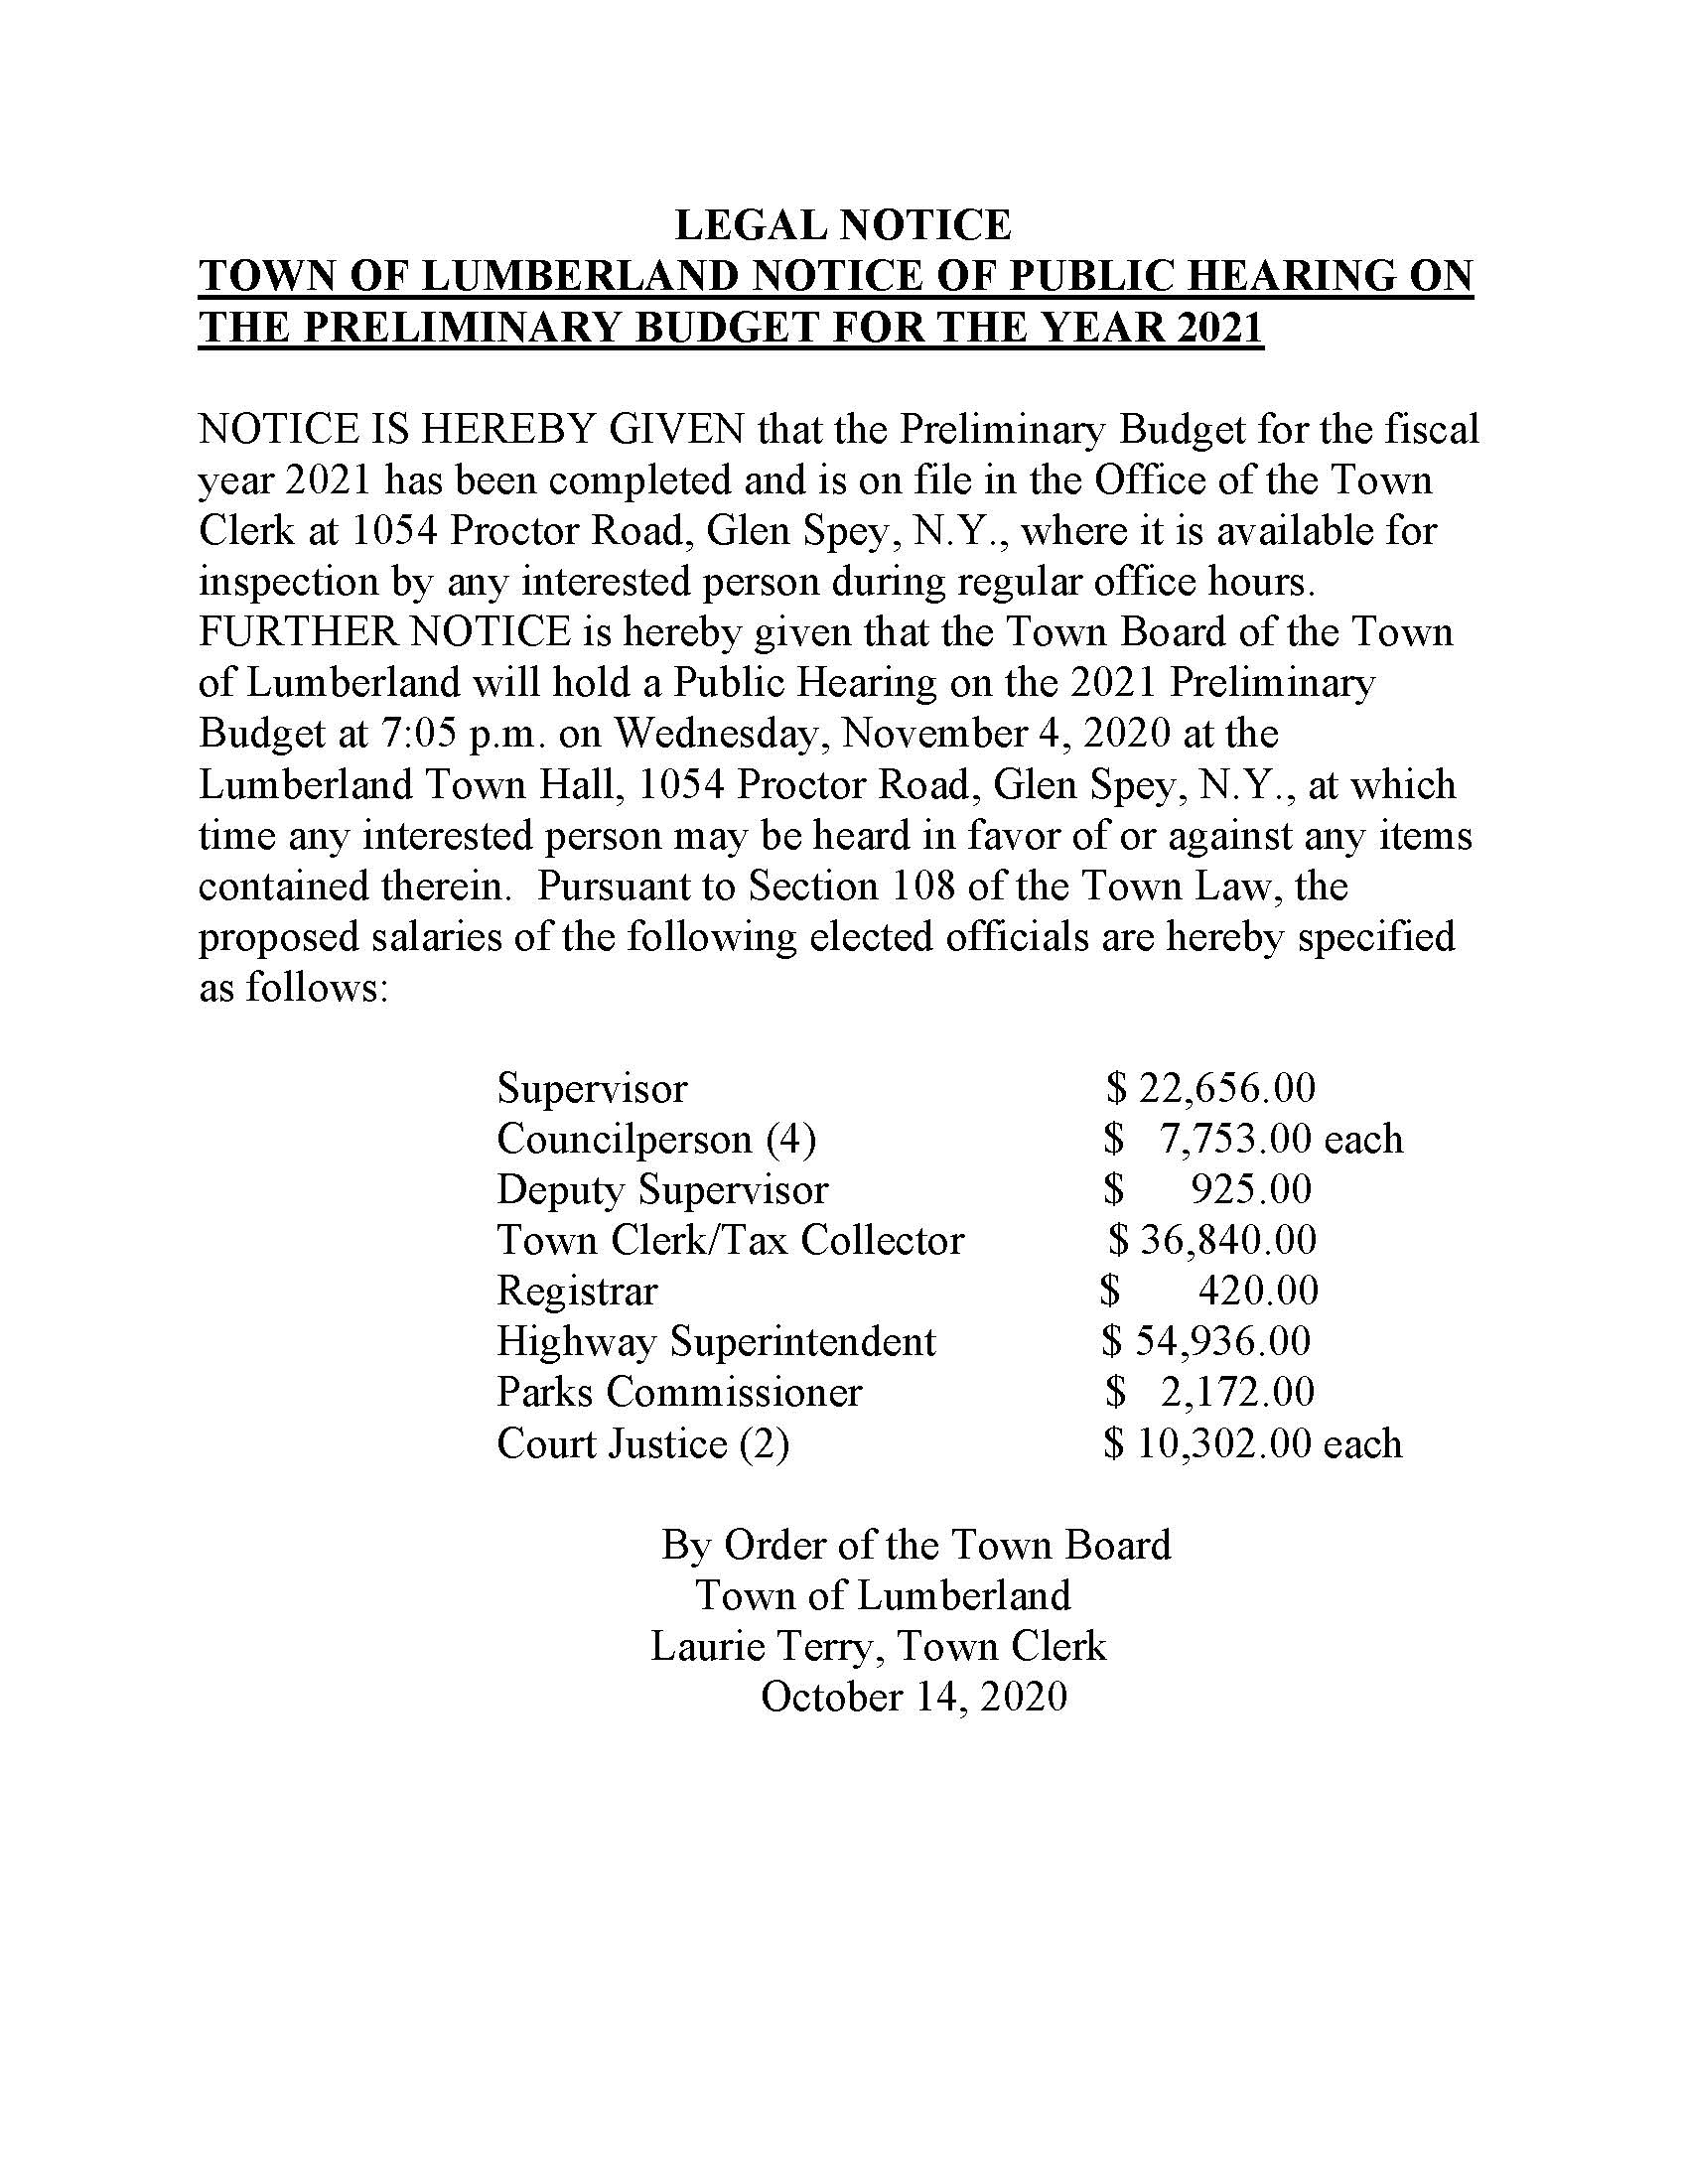 LEGAL NOTICE Public Hearing Budget 2021_Page_1